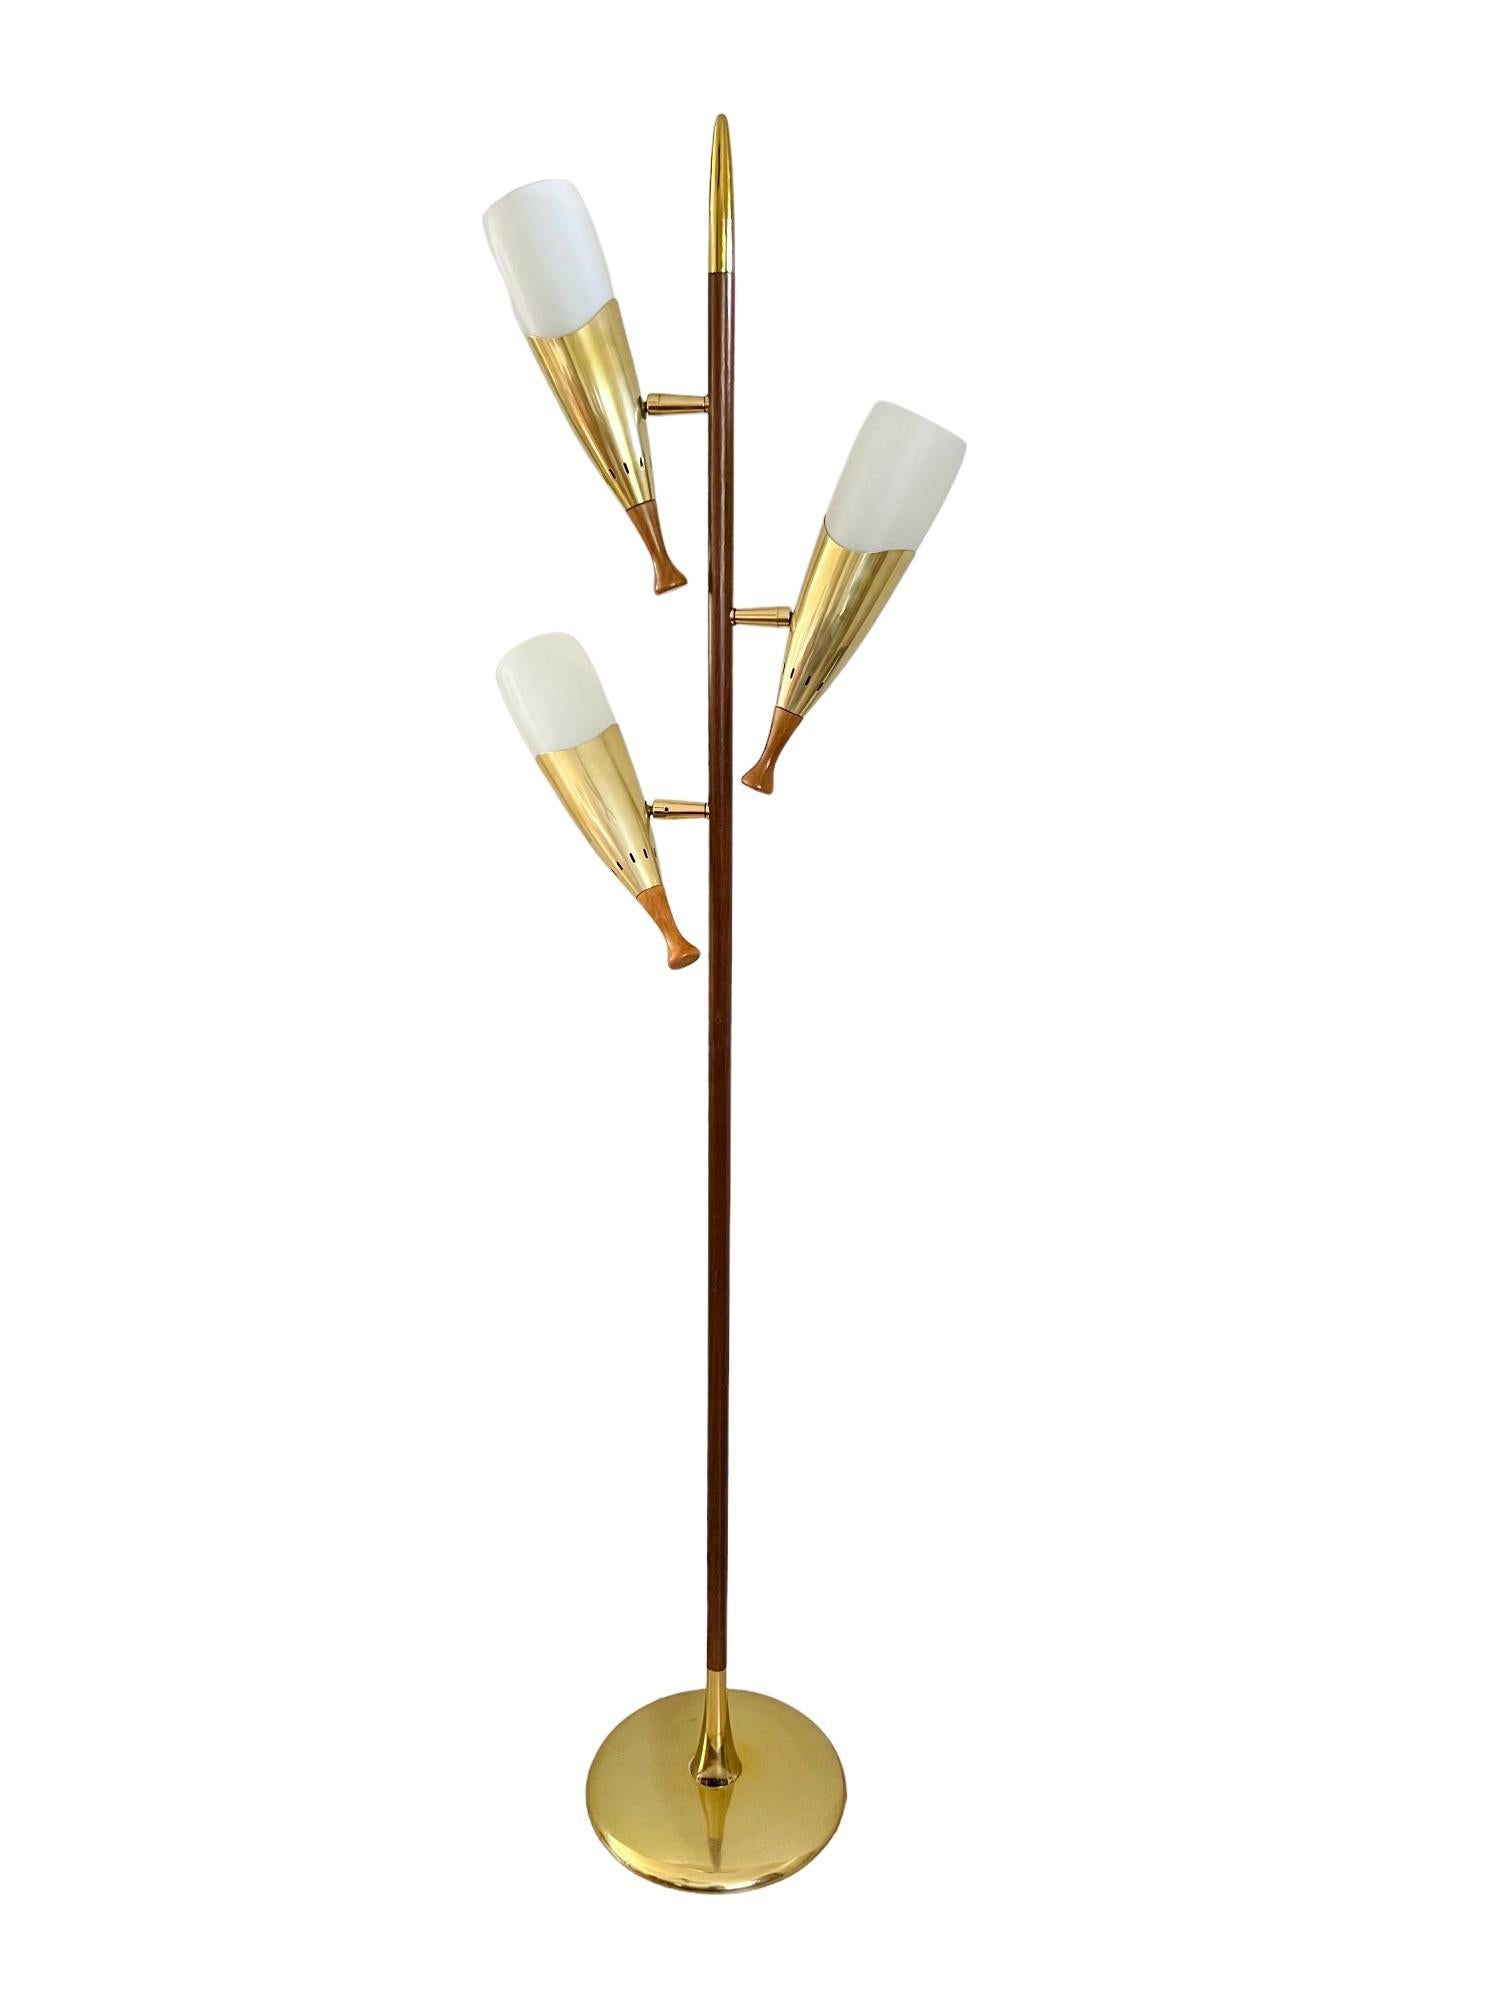 A vintage Mid-Century Modern flagpole floor lamp with three adjustable lights. Teak post with polished brass finial and base. Brass light fixtures and pivots with frosted glass shades and walnut rotary knobs. Includes 3 bulbs.

Dimensions: 18